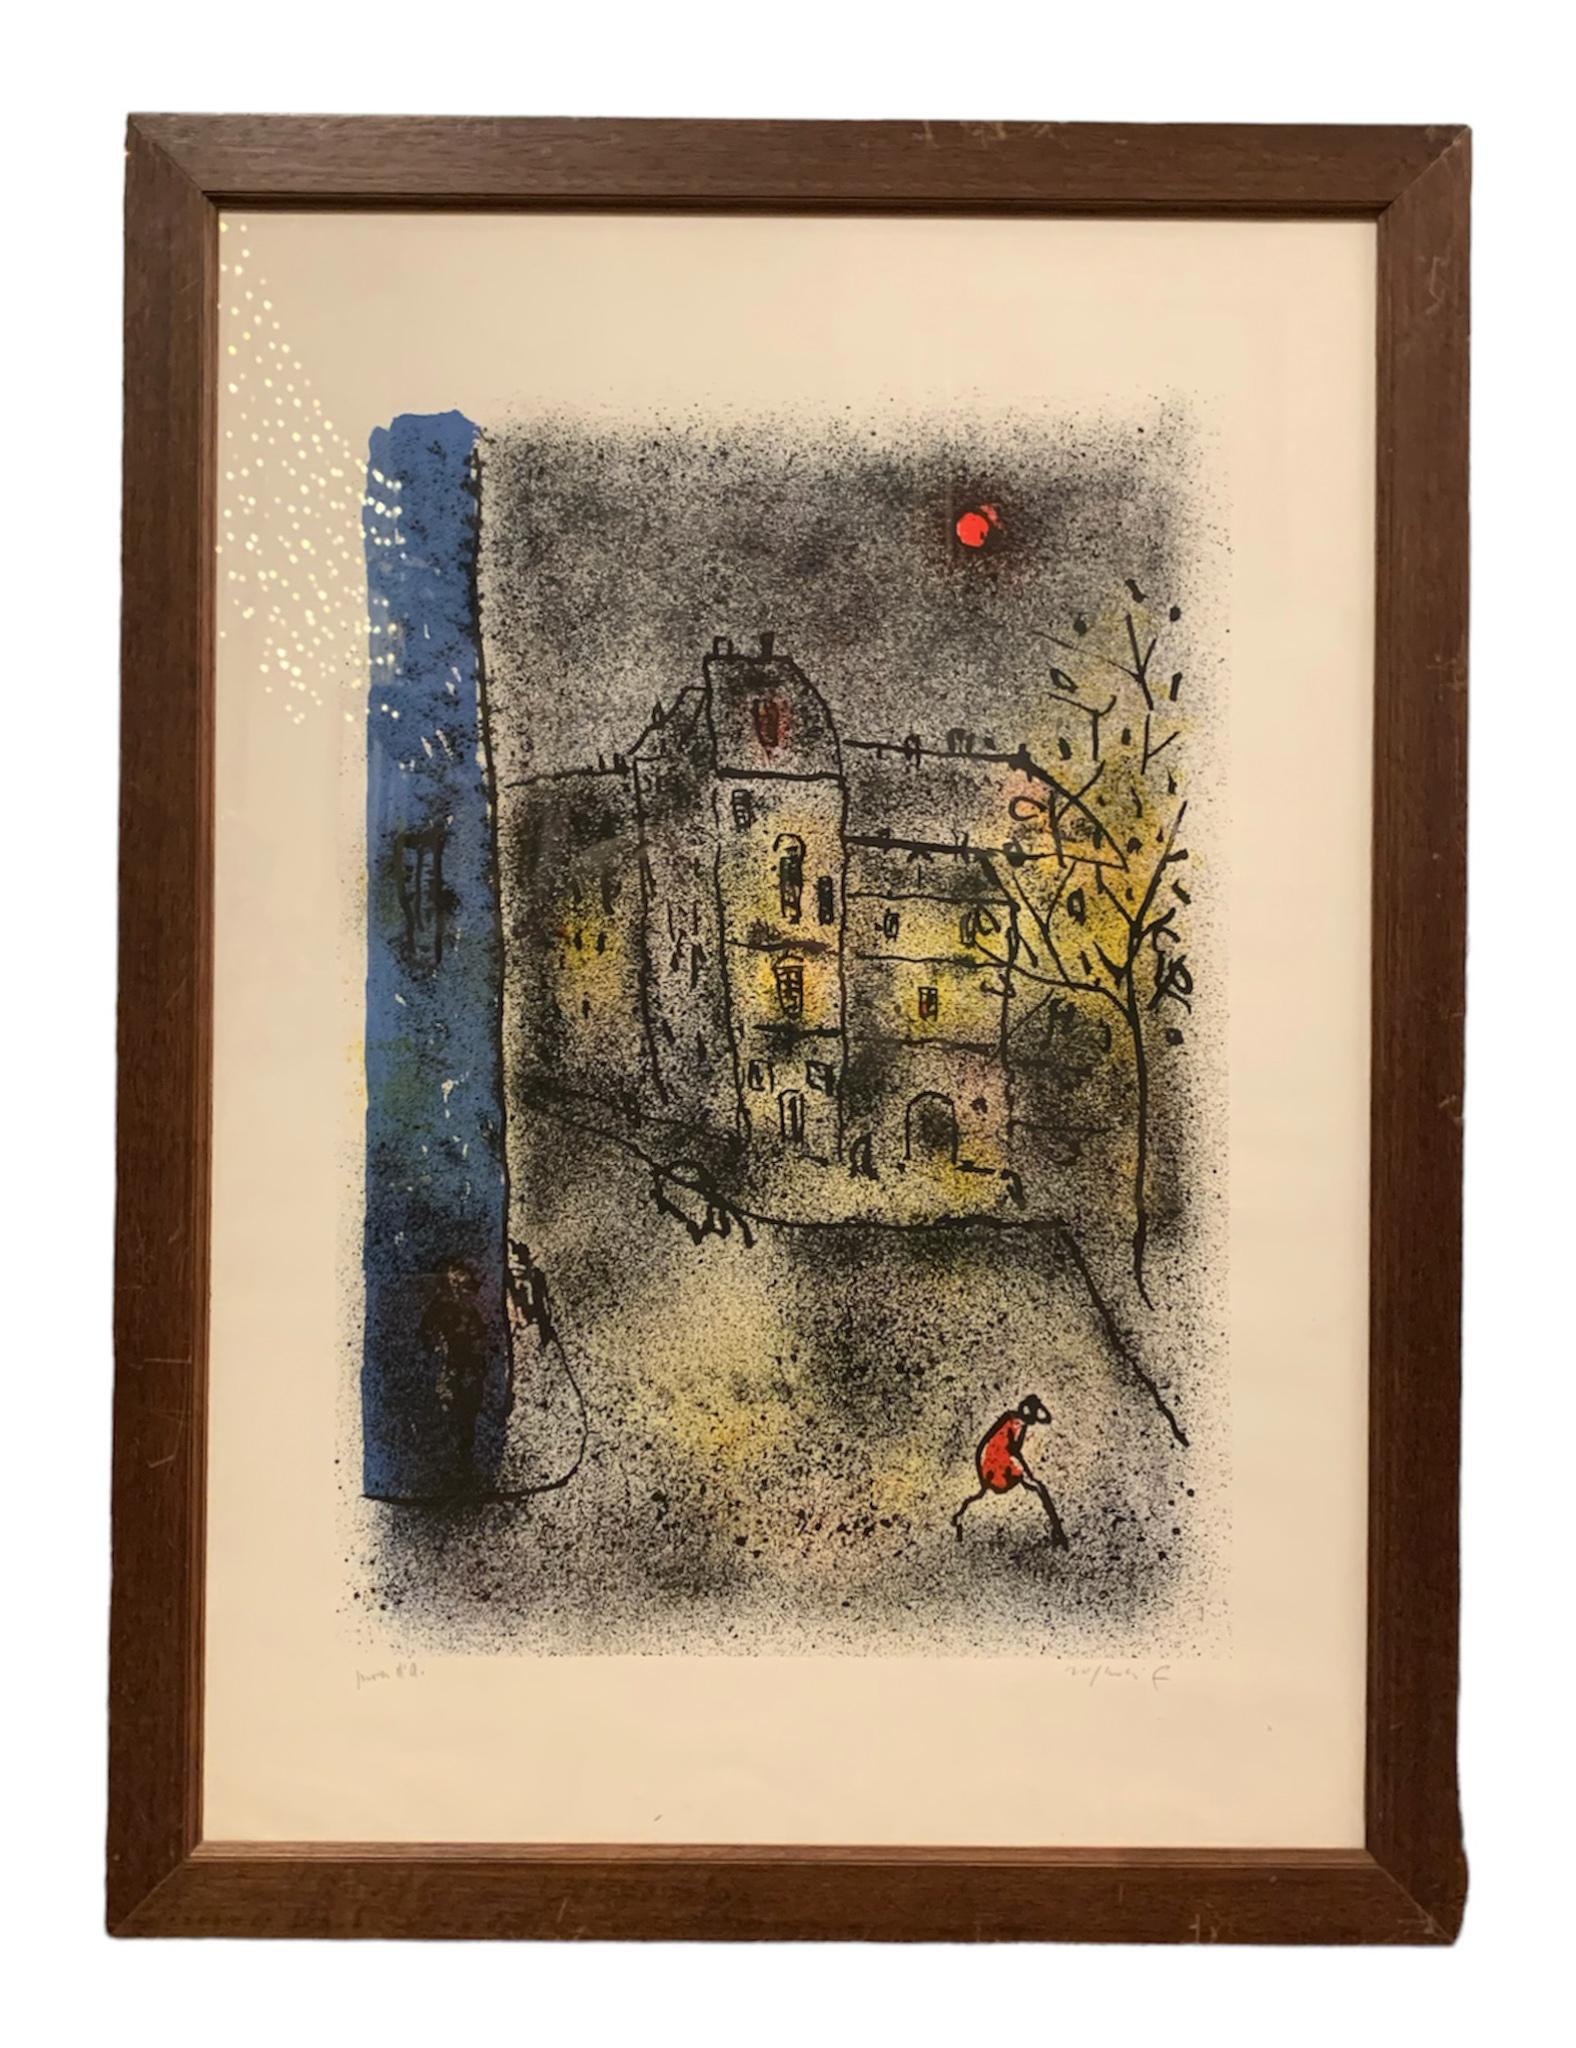 Author's proof lithograph by Franco Rognoni made in the 1970s. The lithograph is shipped without frame and crystal. 

Ø cm 57 h cm 77

Born in 1913 in Milan, he was a painter, designer and engraver who stood out for his sometimes surreal pictorial